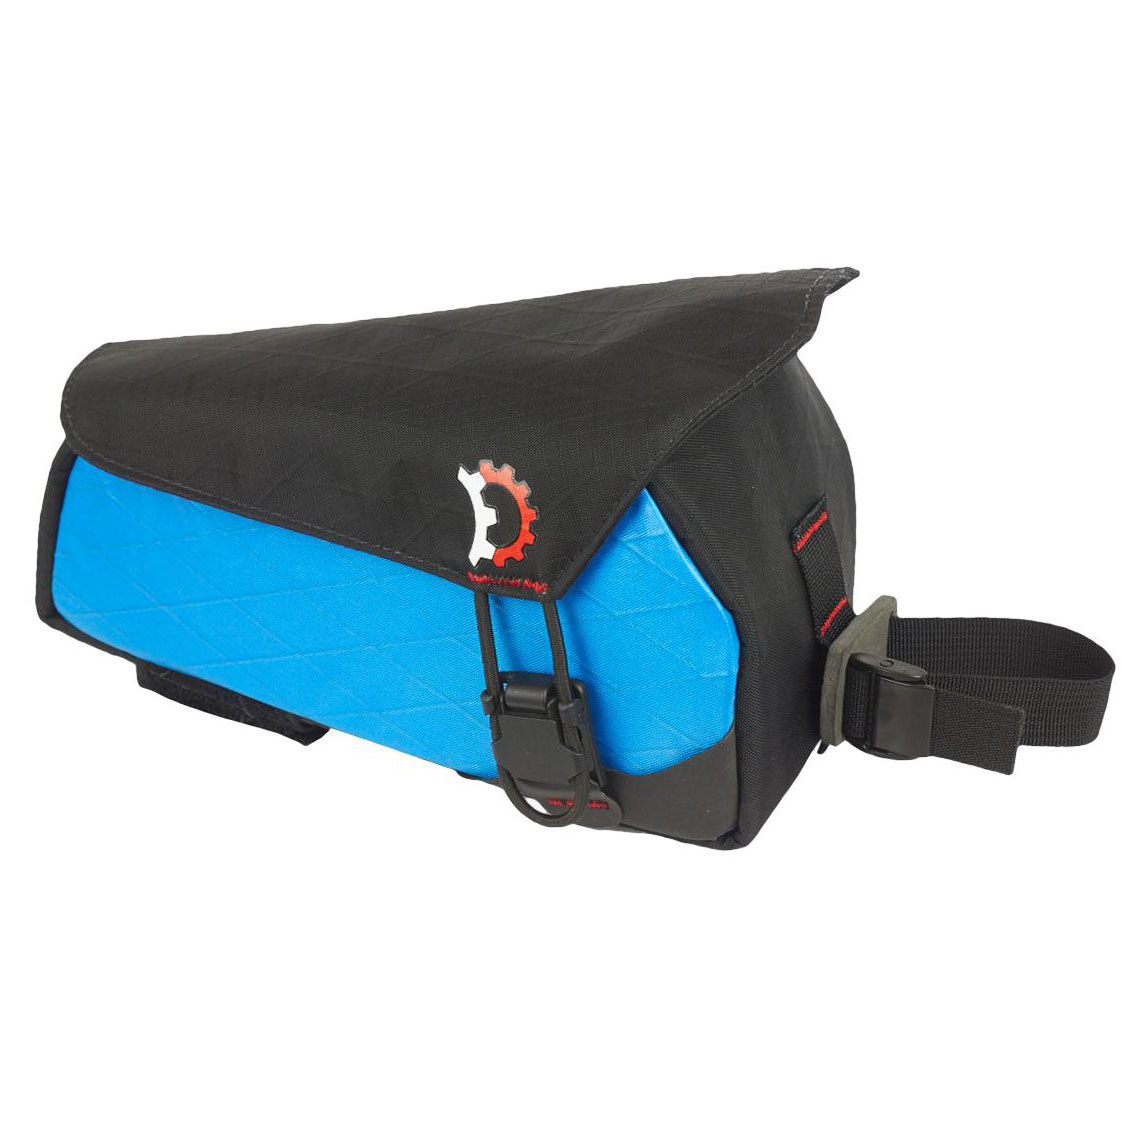 Picture of Revelate Designs Mag Tank 2000 EcoPac Top Tube Bag - 1.4L - blue